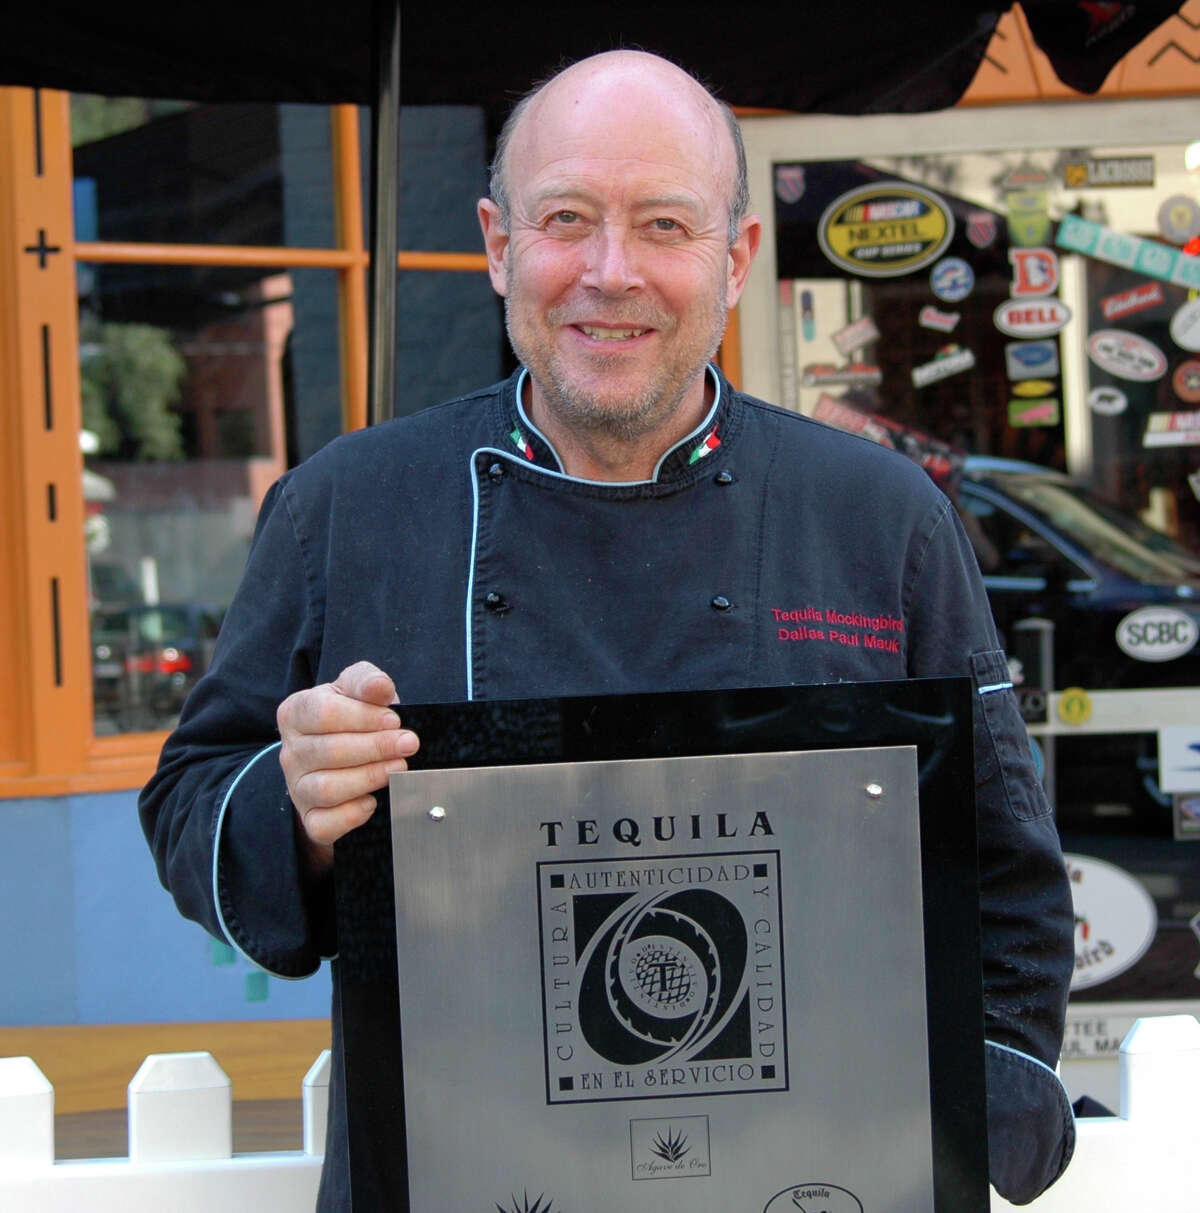 Dallas "Paul" Mauk, chef and owner of Tequila Mockingbird, holds the CRT Award T certification plaque his establishment recently received.